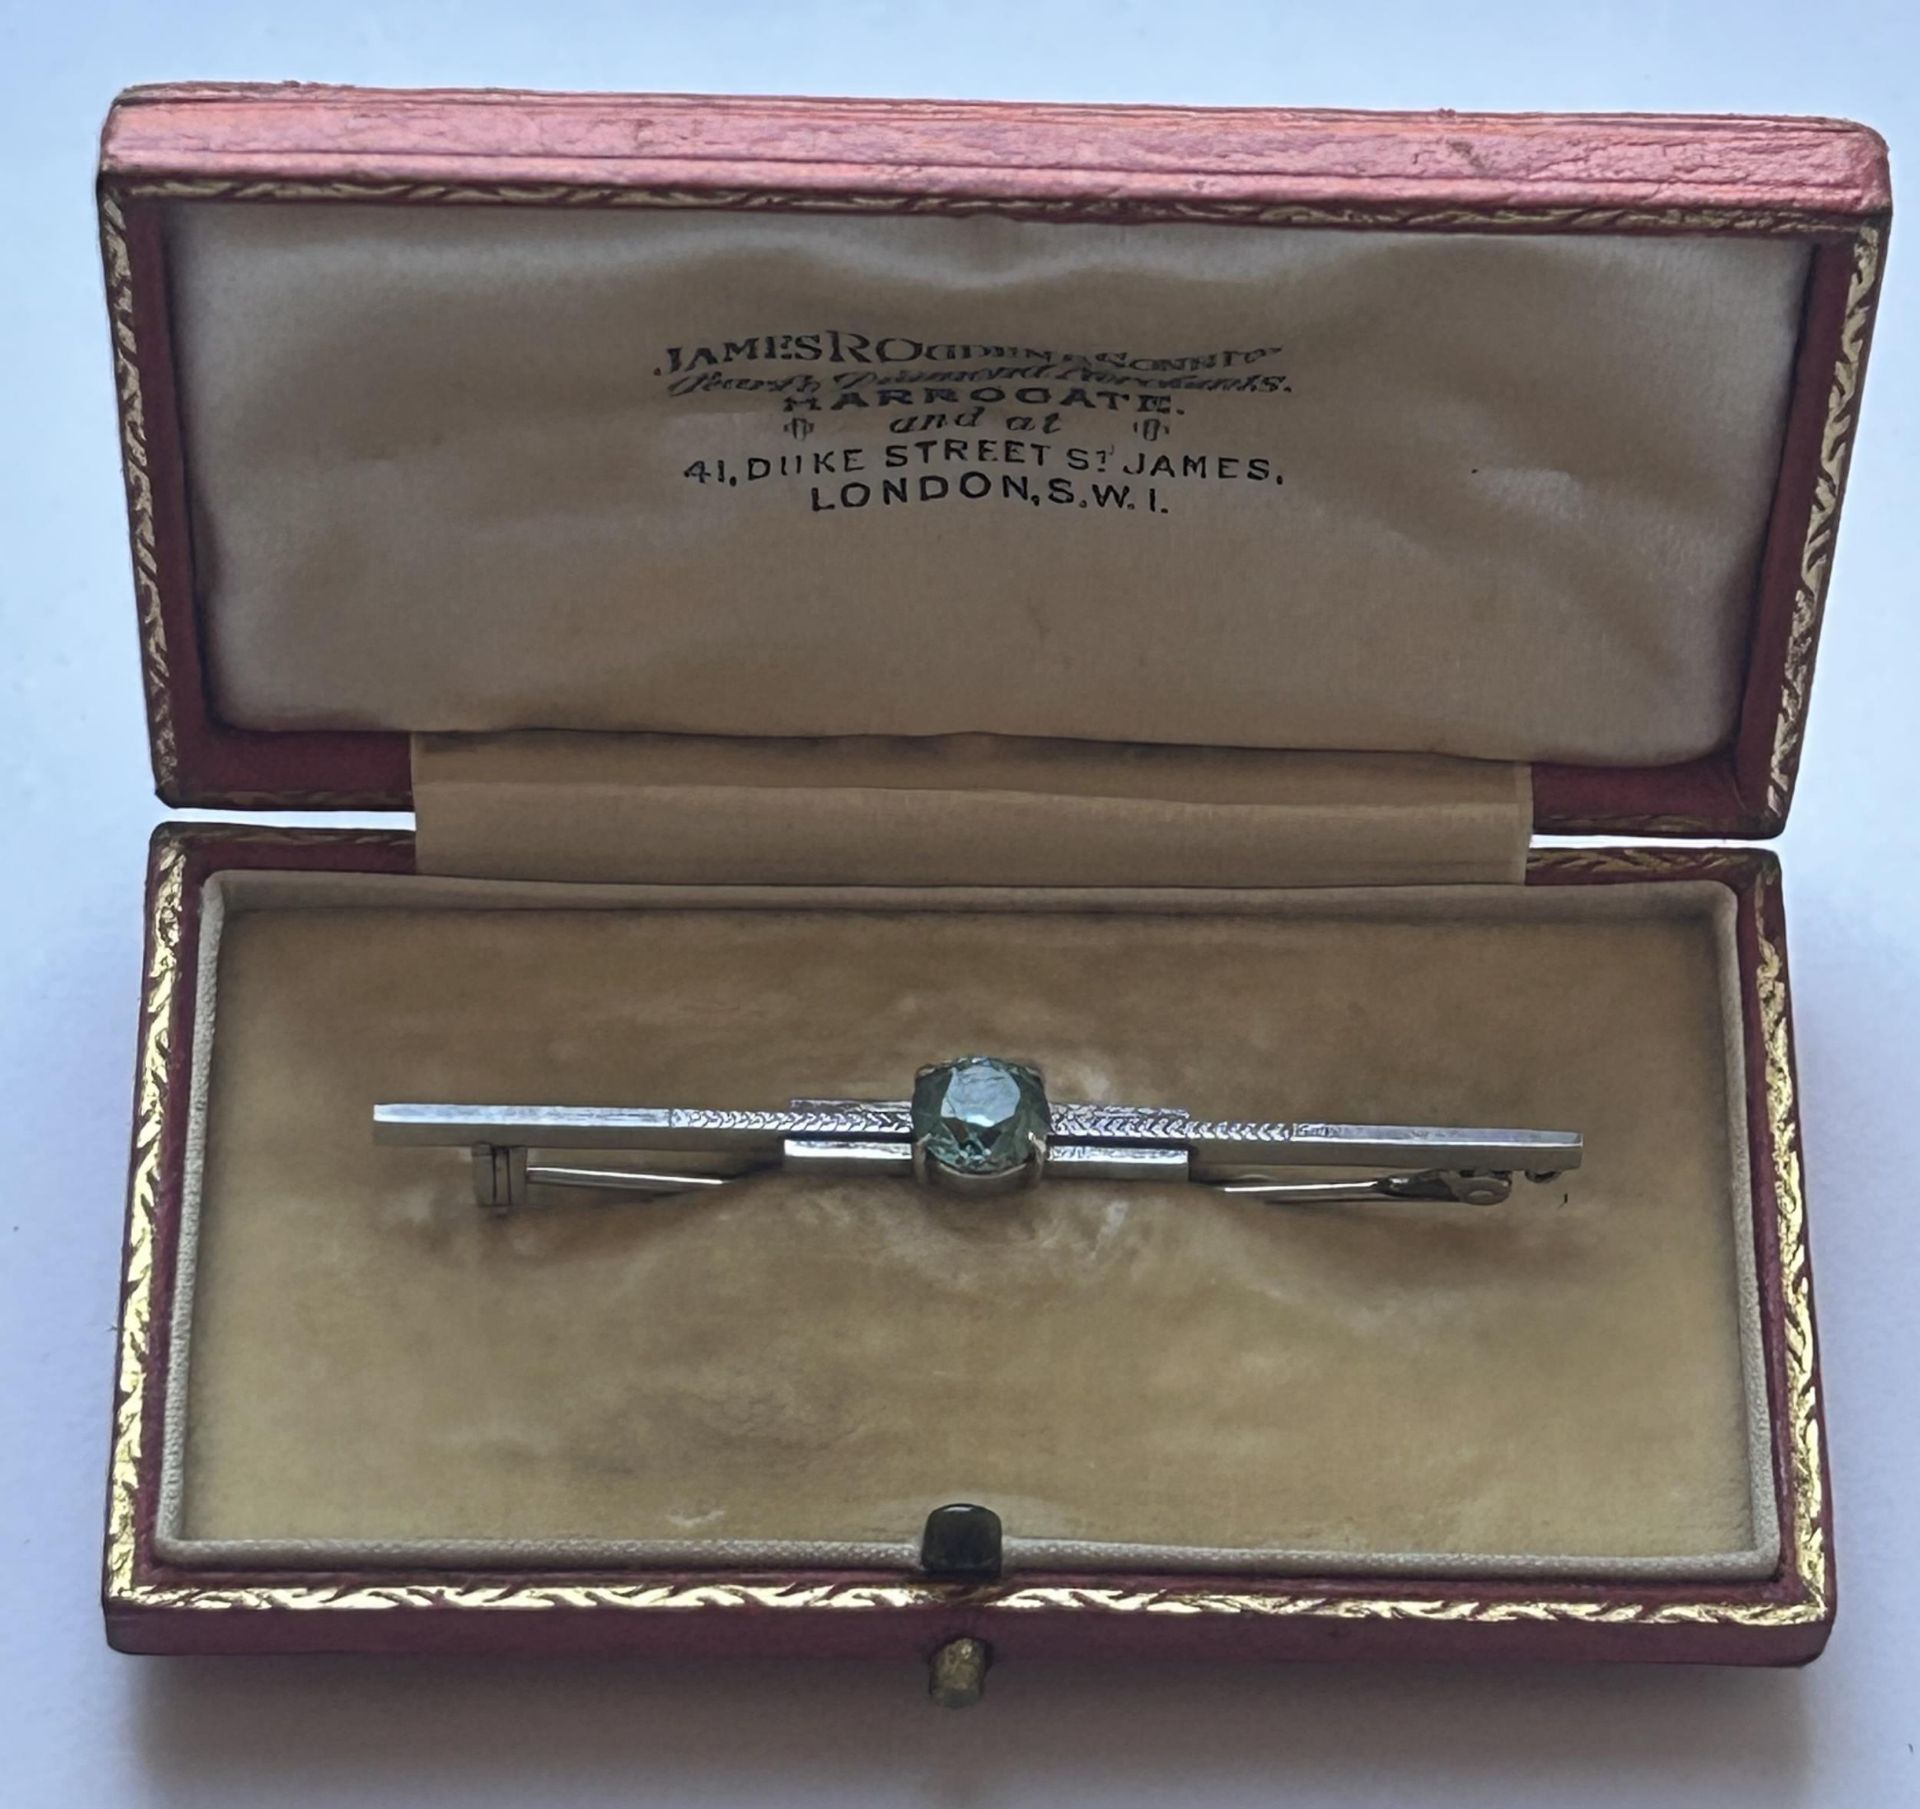 A 9CT WHITE GOLD ART DECO STYLE BROOCH WITH A BLUE TOPAZ AND ORIGINAL BOX, LENGTH 58MM, GROSS WEIGHT